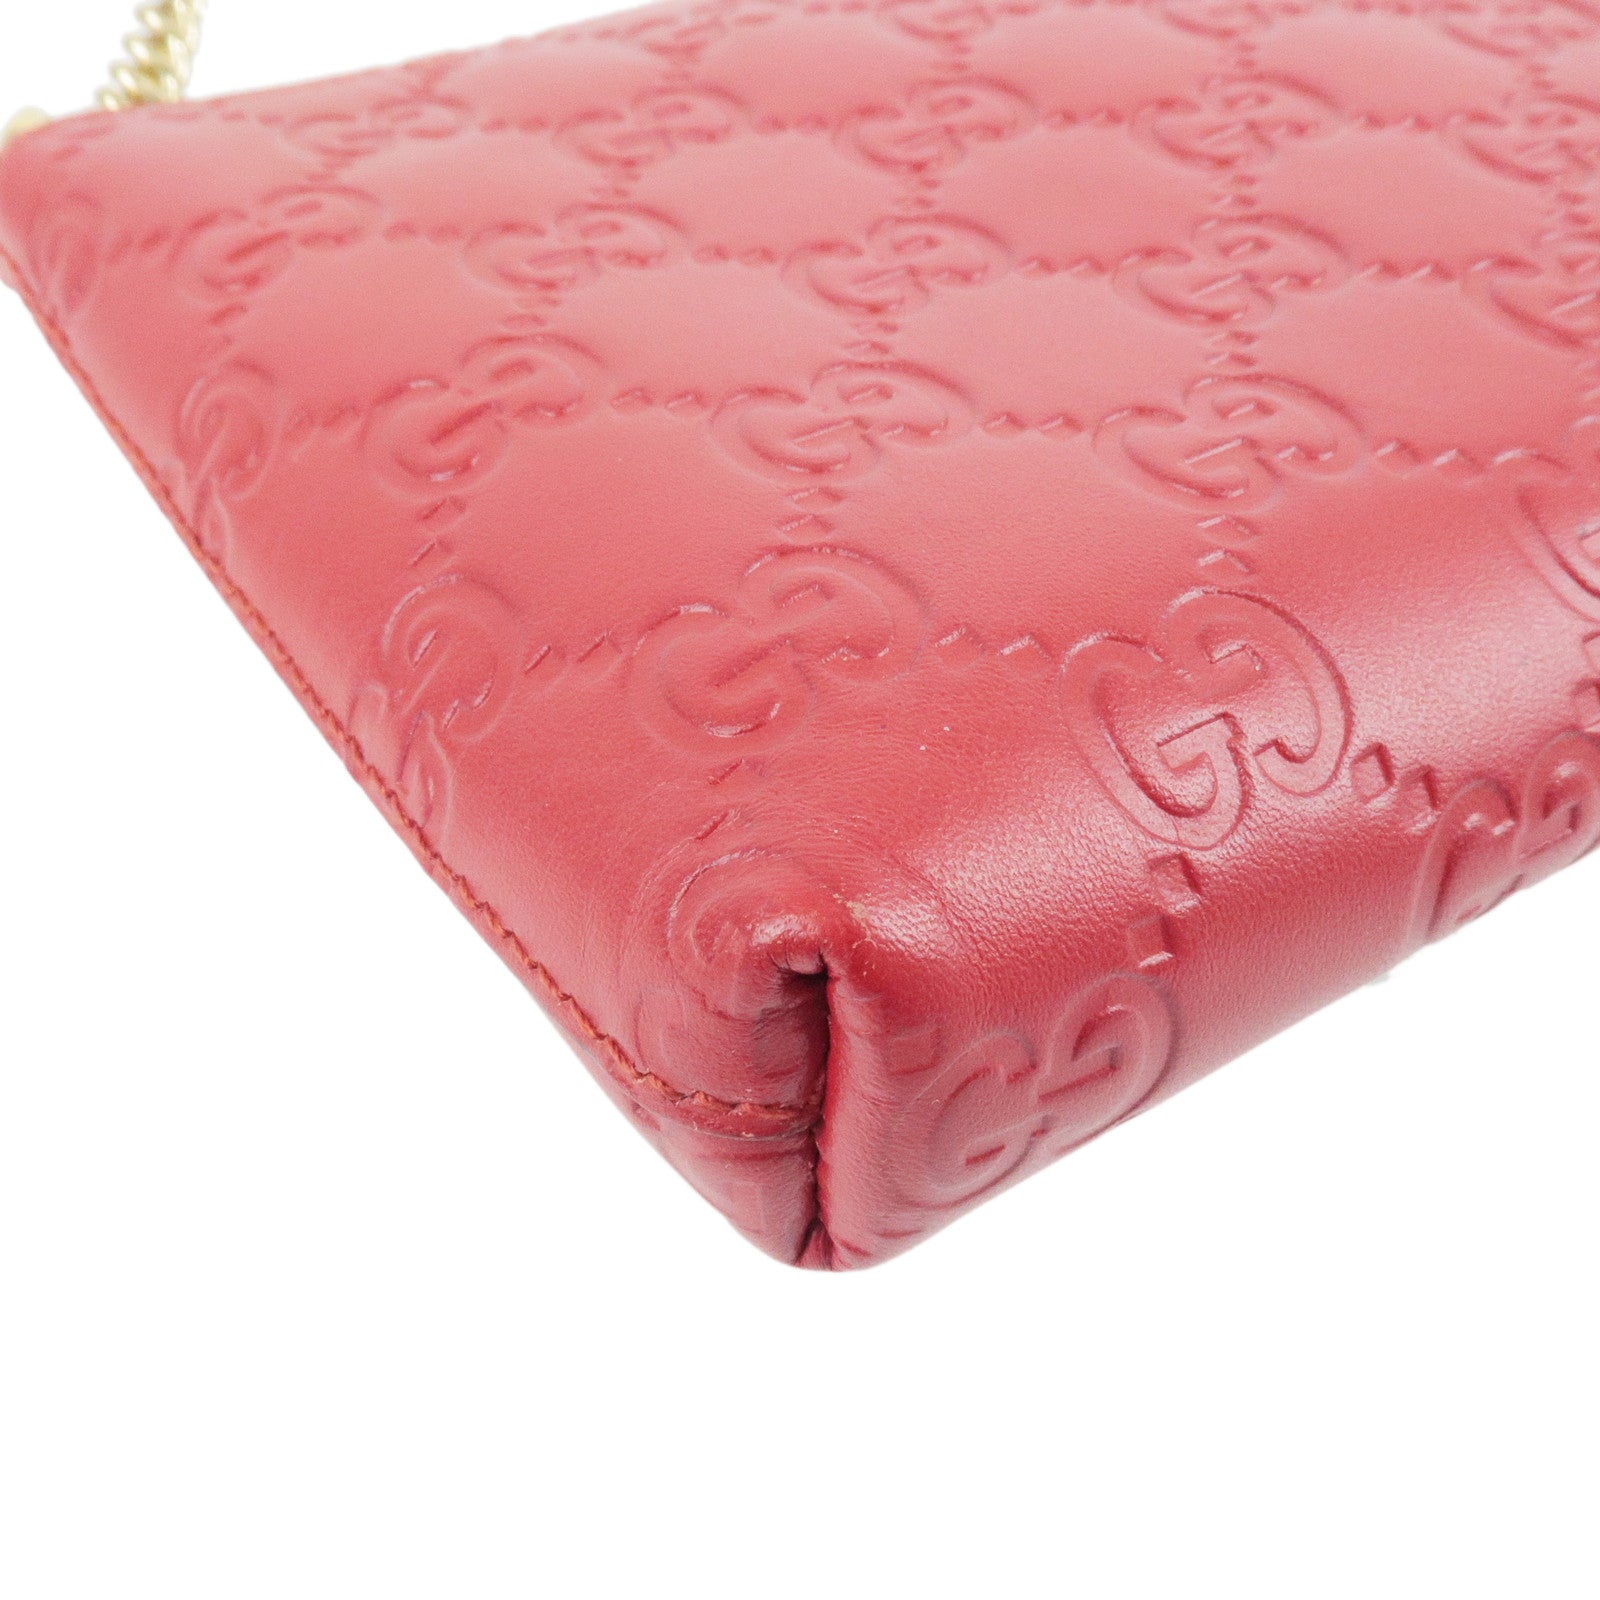 GUCCI-Guccissima-Leather-Chain-Accessory-Pouch-Red-428449 – dct-ep_vintage  luxury Store